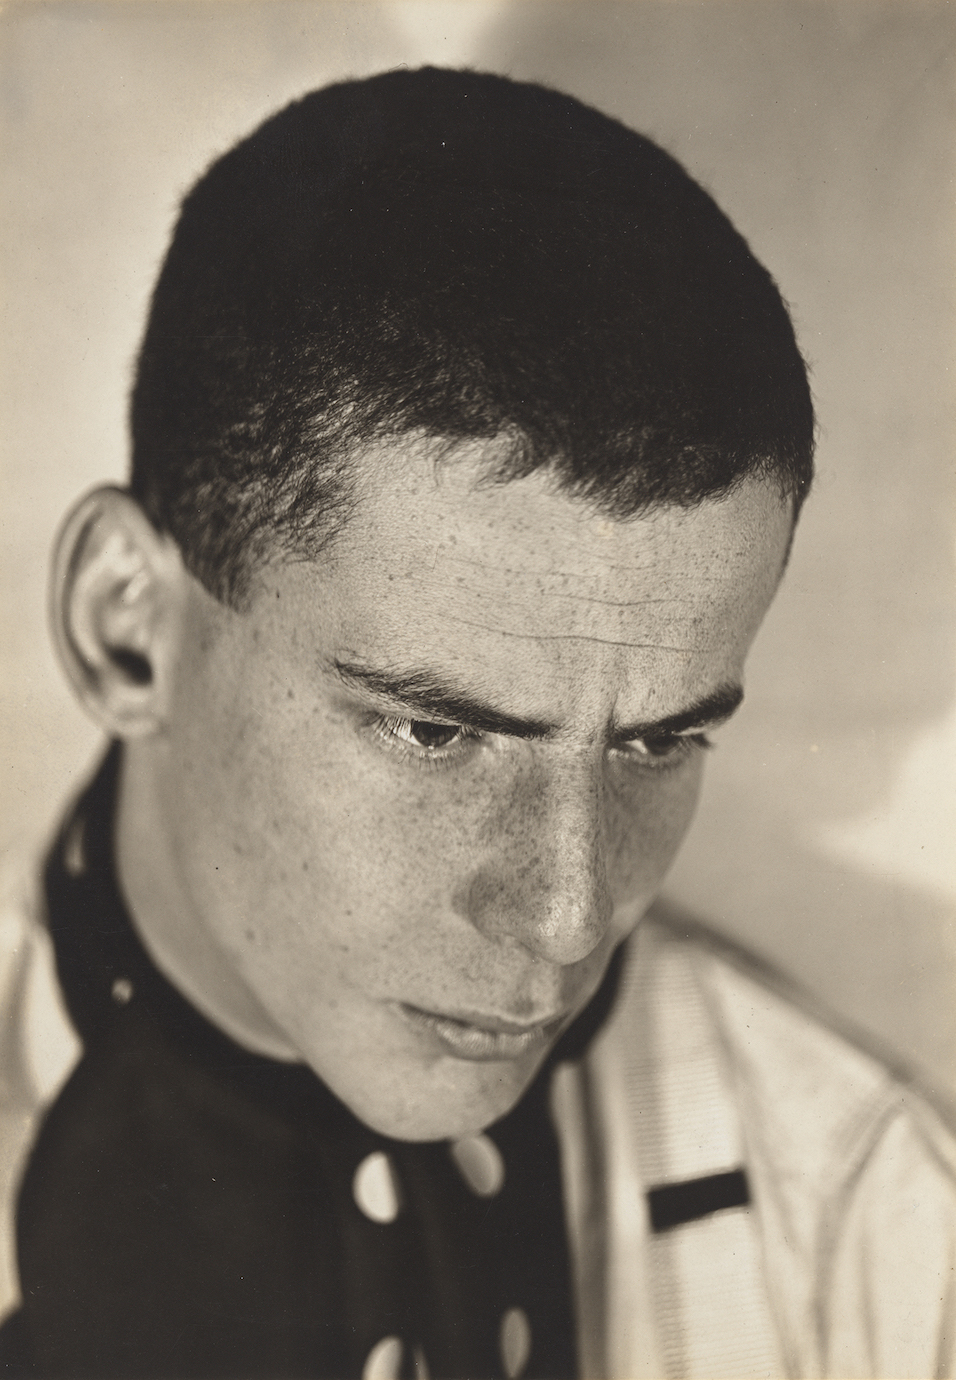 A portrait of Lincoln Kirstein by Walker Evans. Courtesy of The Museum of Modern Art, New York.